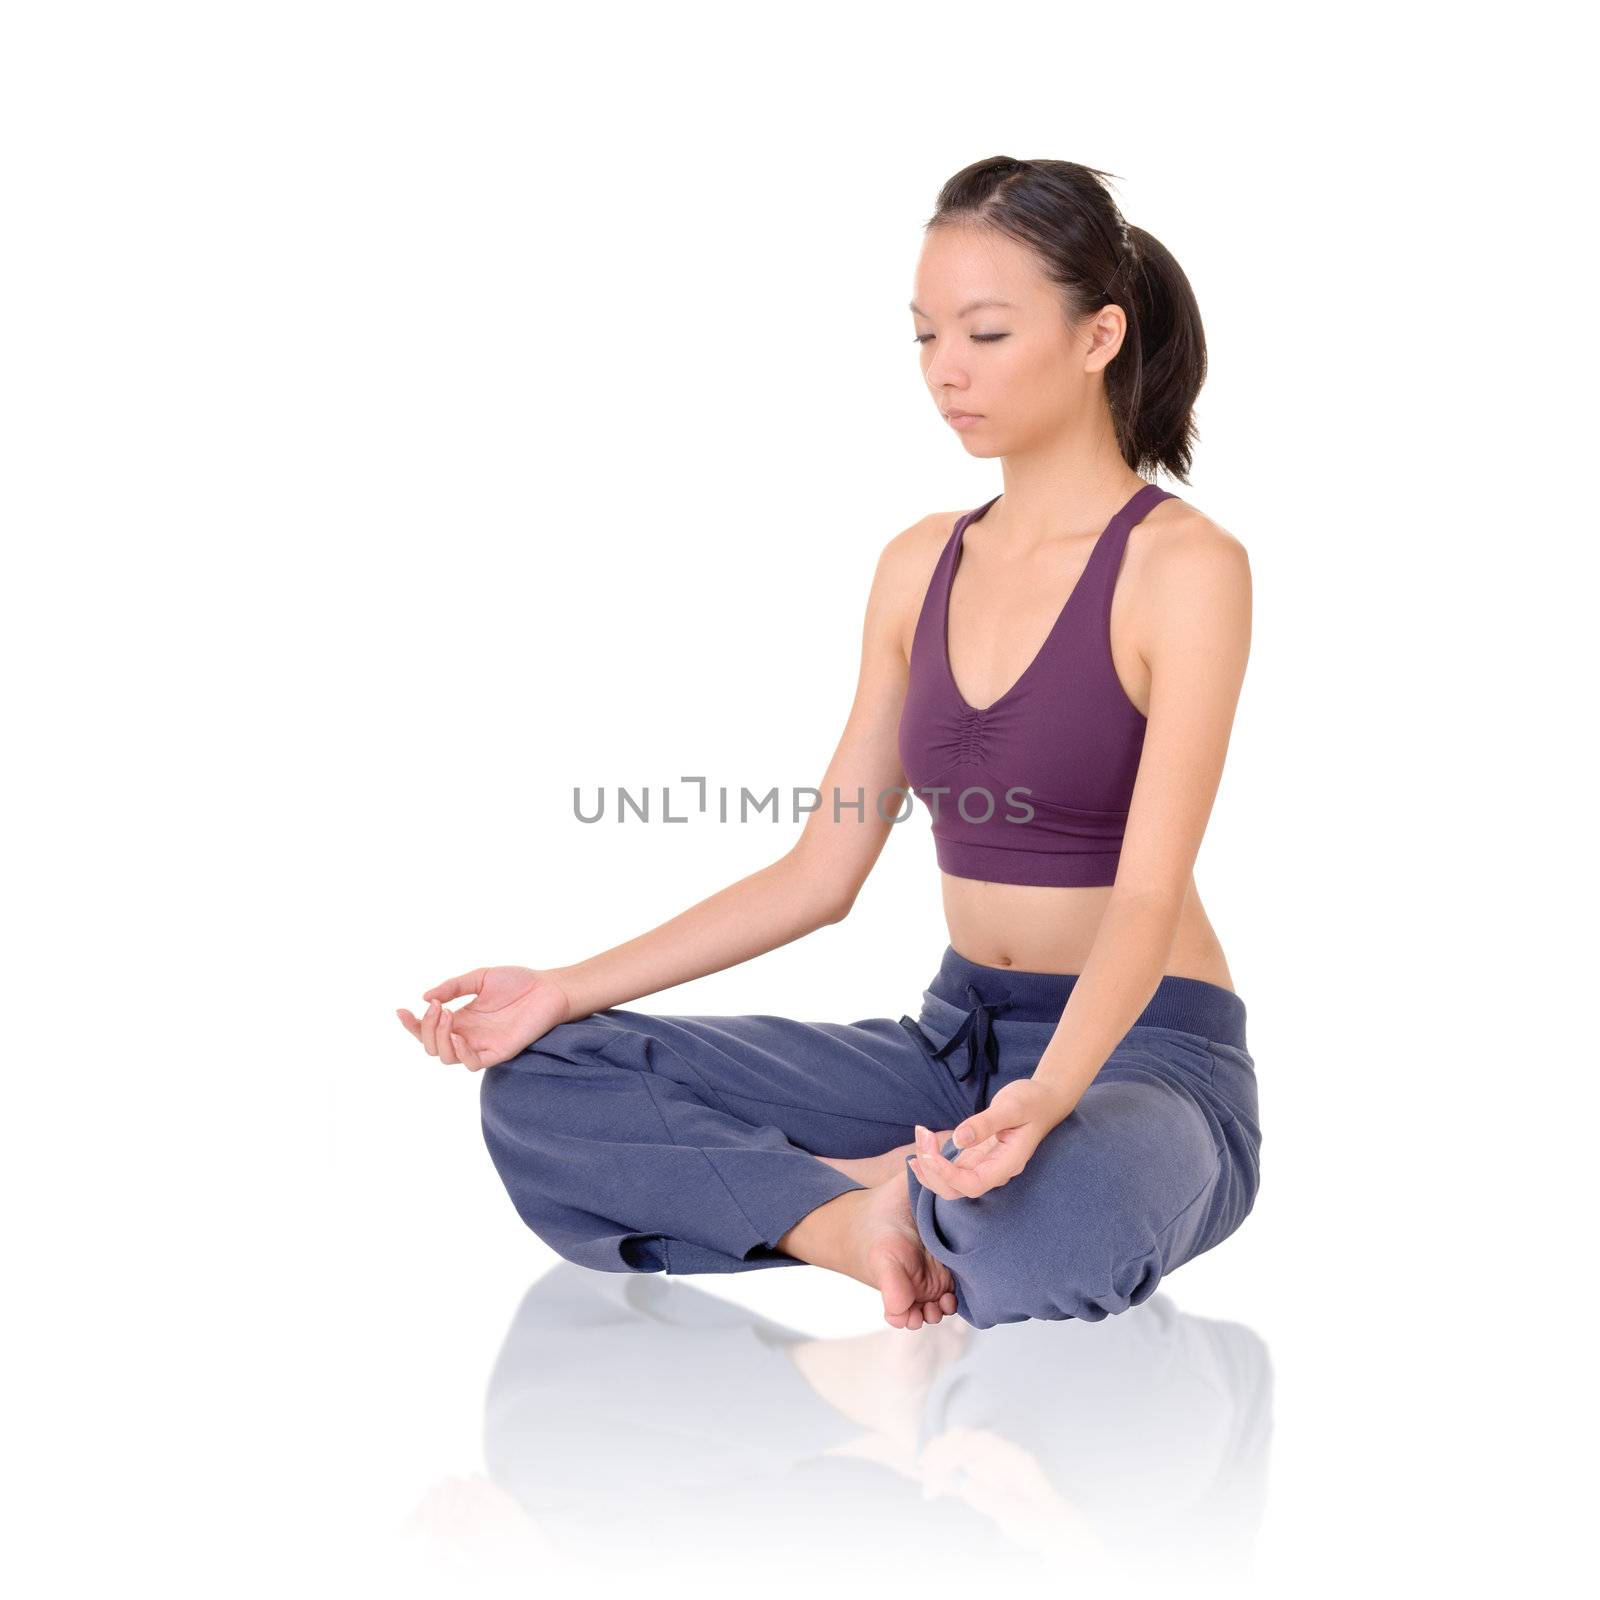 Yoga exercise on ground by Asian girl of fitness, full length portrait isolated on white background.